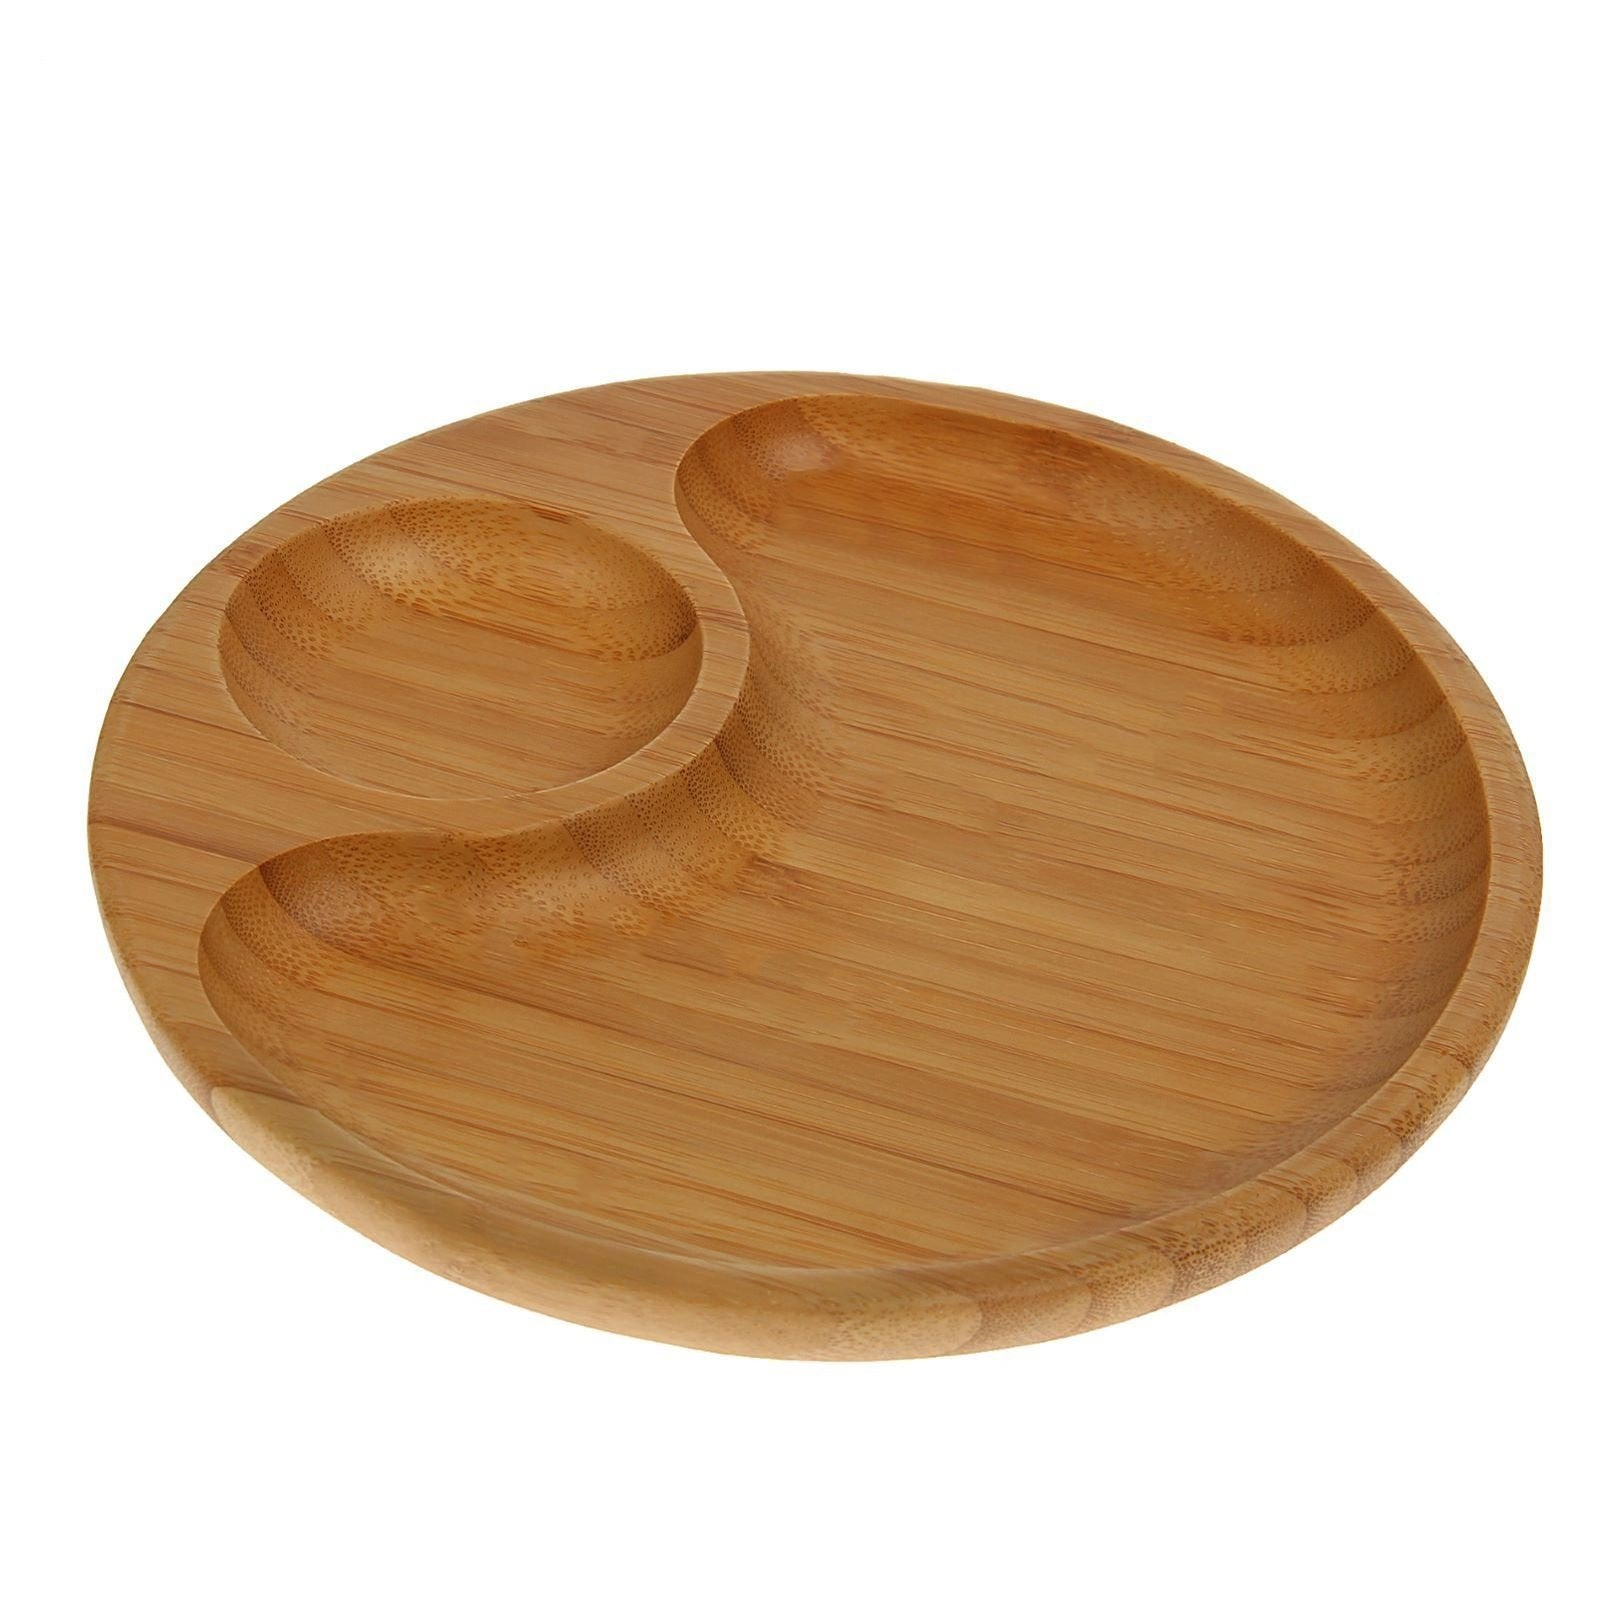 WILMAX Bamboo Round 2 Section Platter 10" | For Appetizers / Barbecue / Burger Sliders